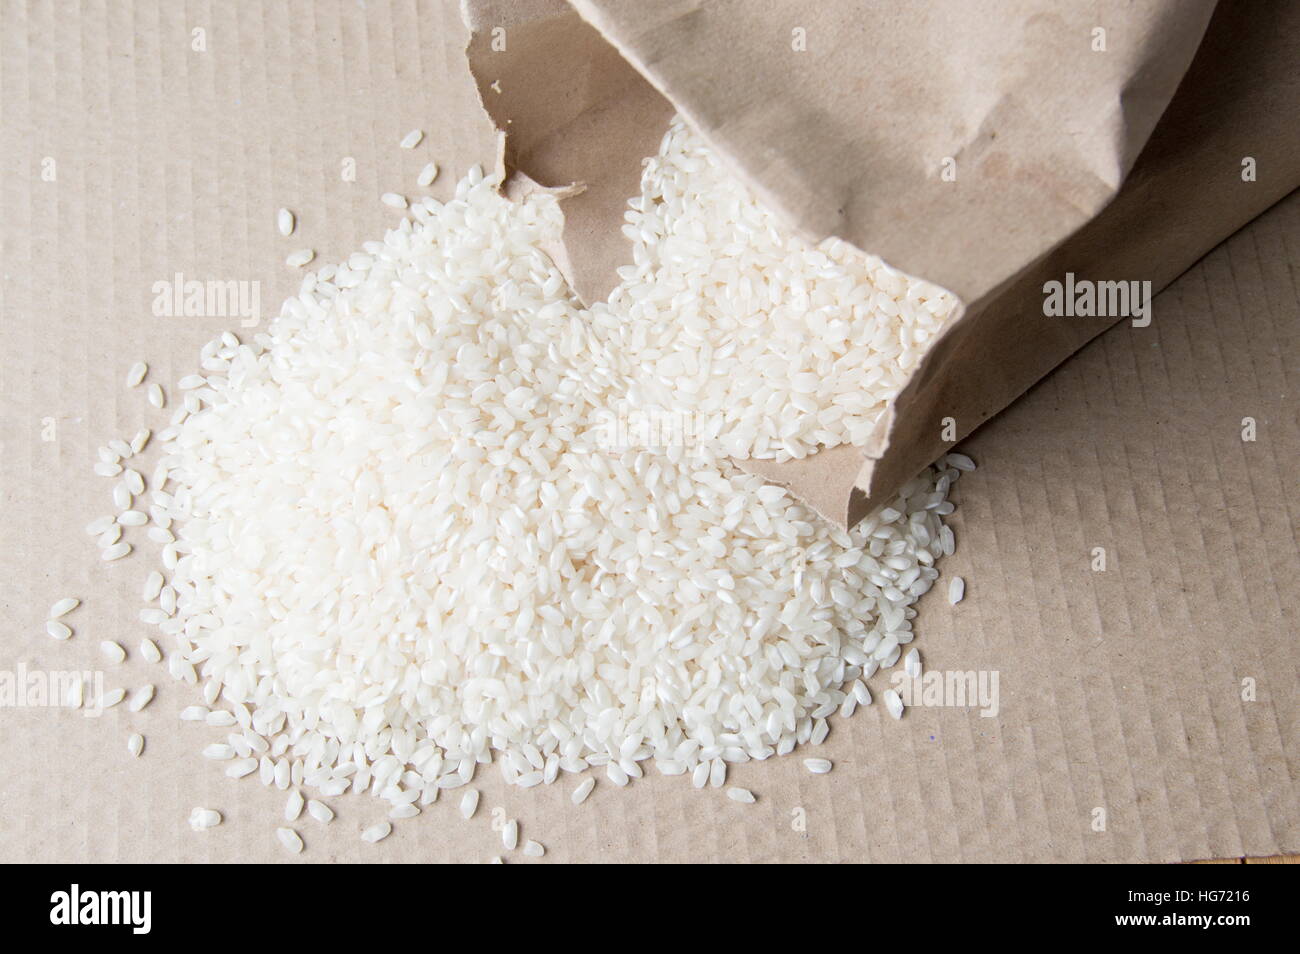 Rice falling out of big paper bag Stock Photo